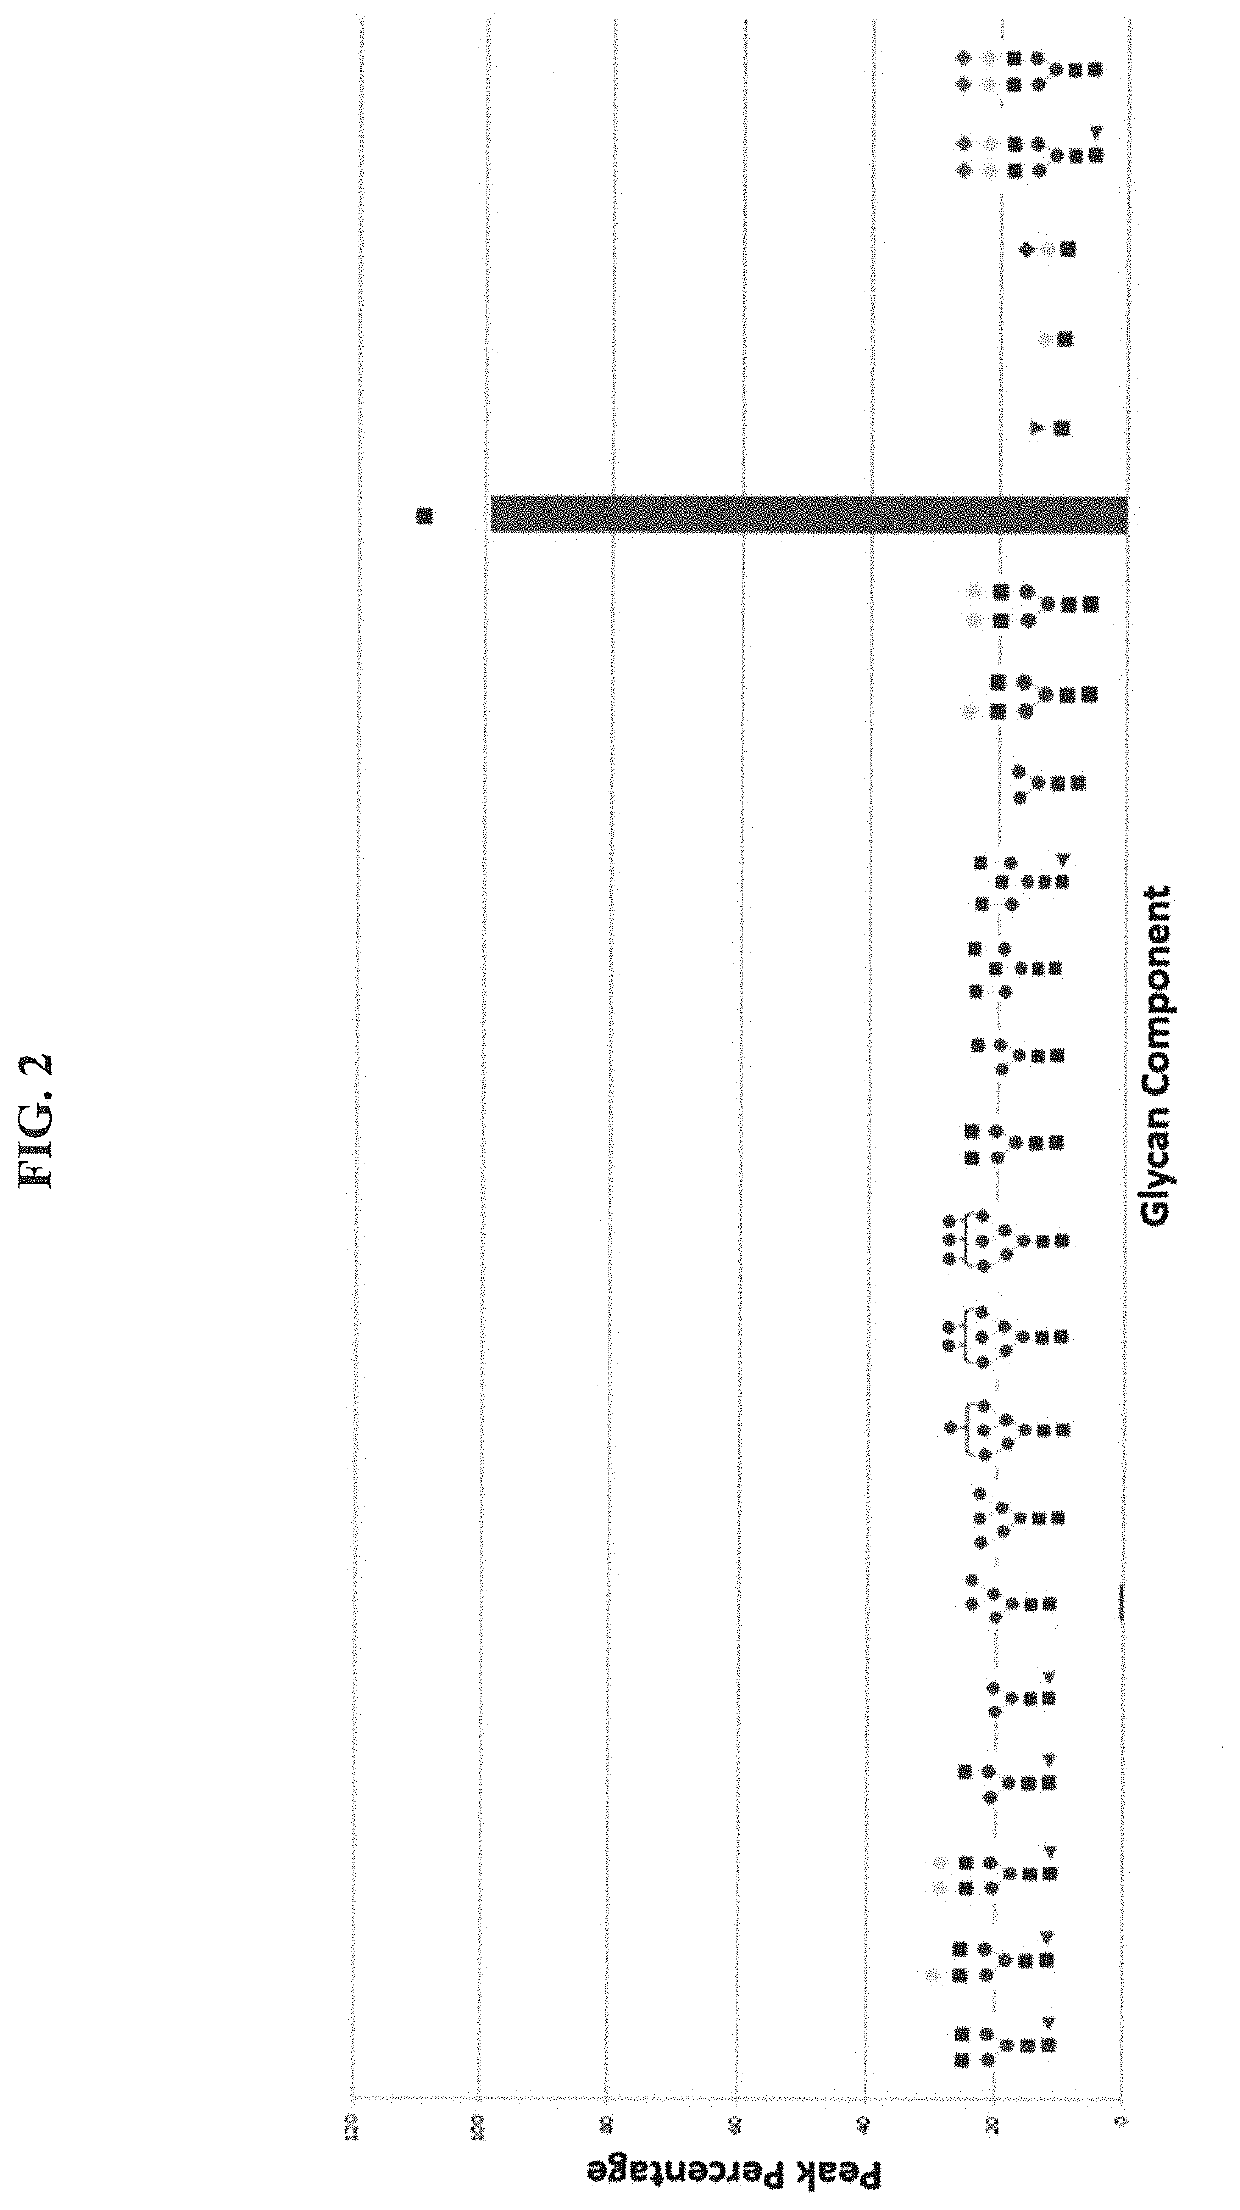 Glycosynthase variants for glycoprotein engineering and methods of use